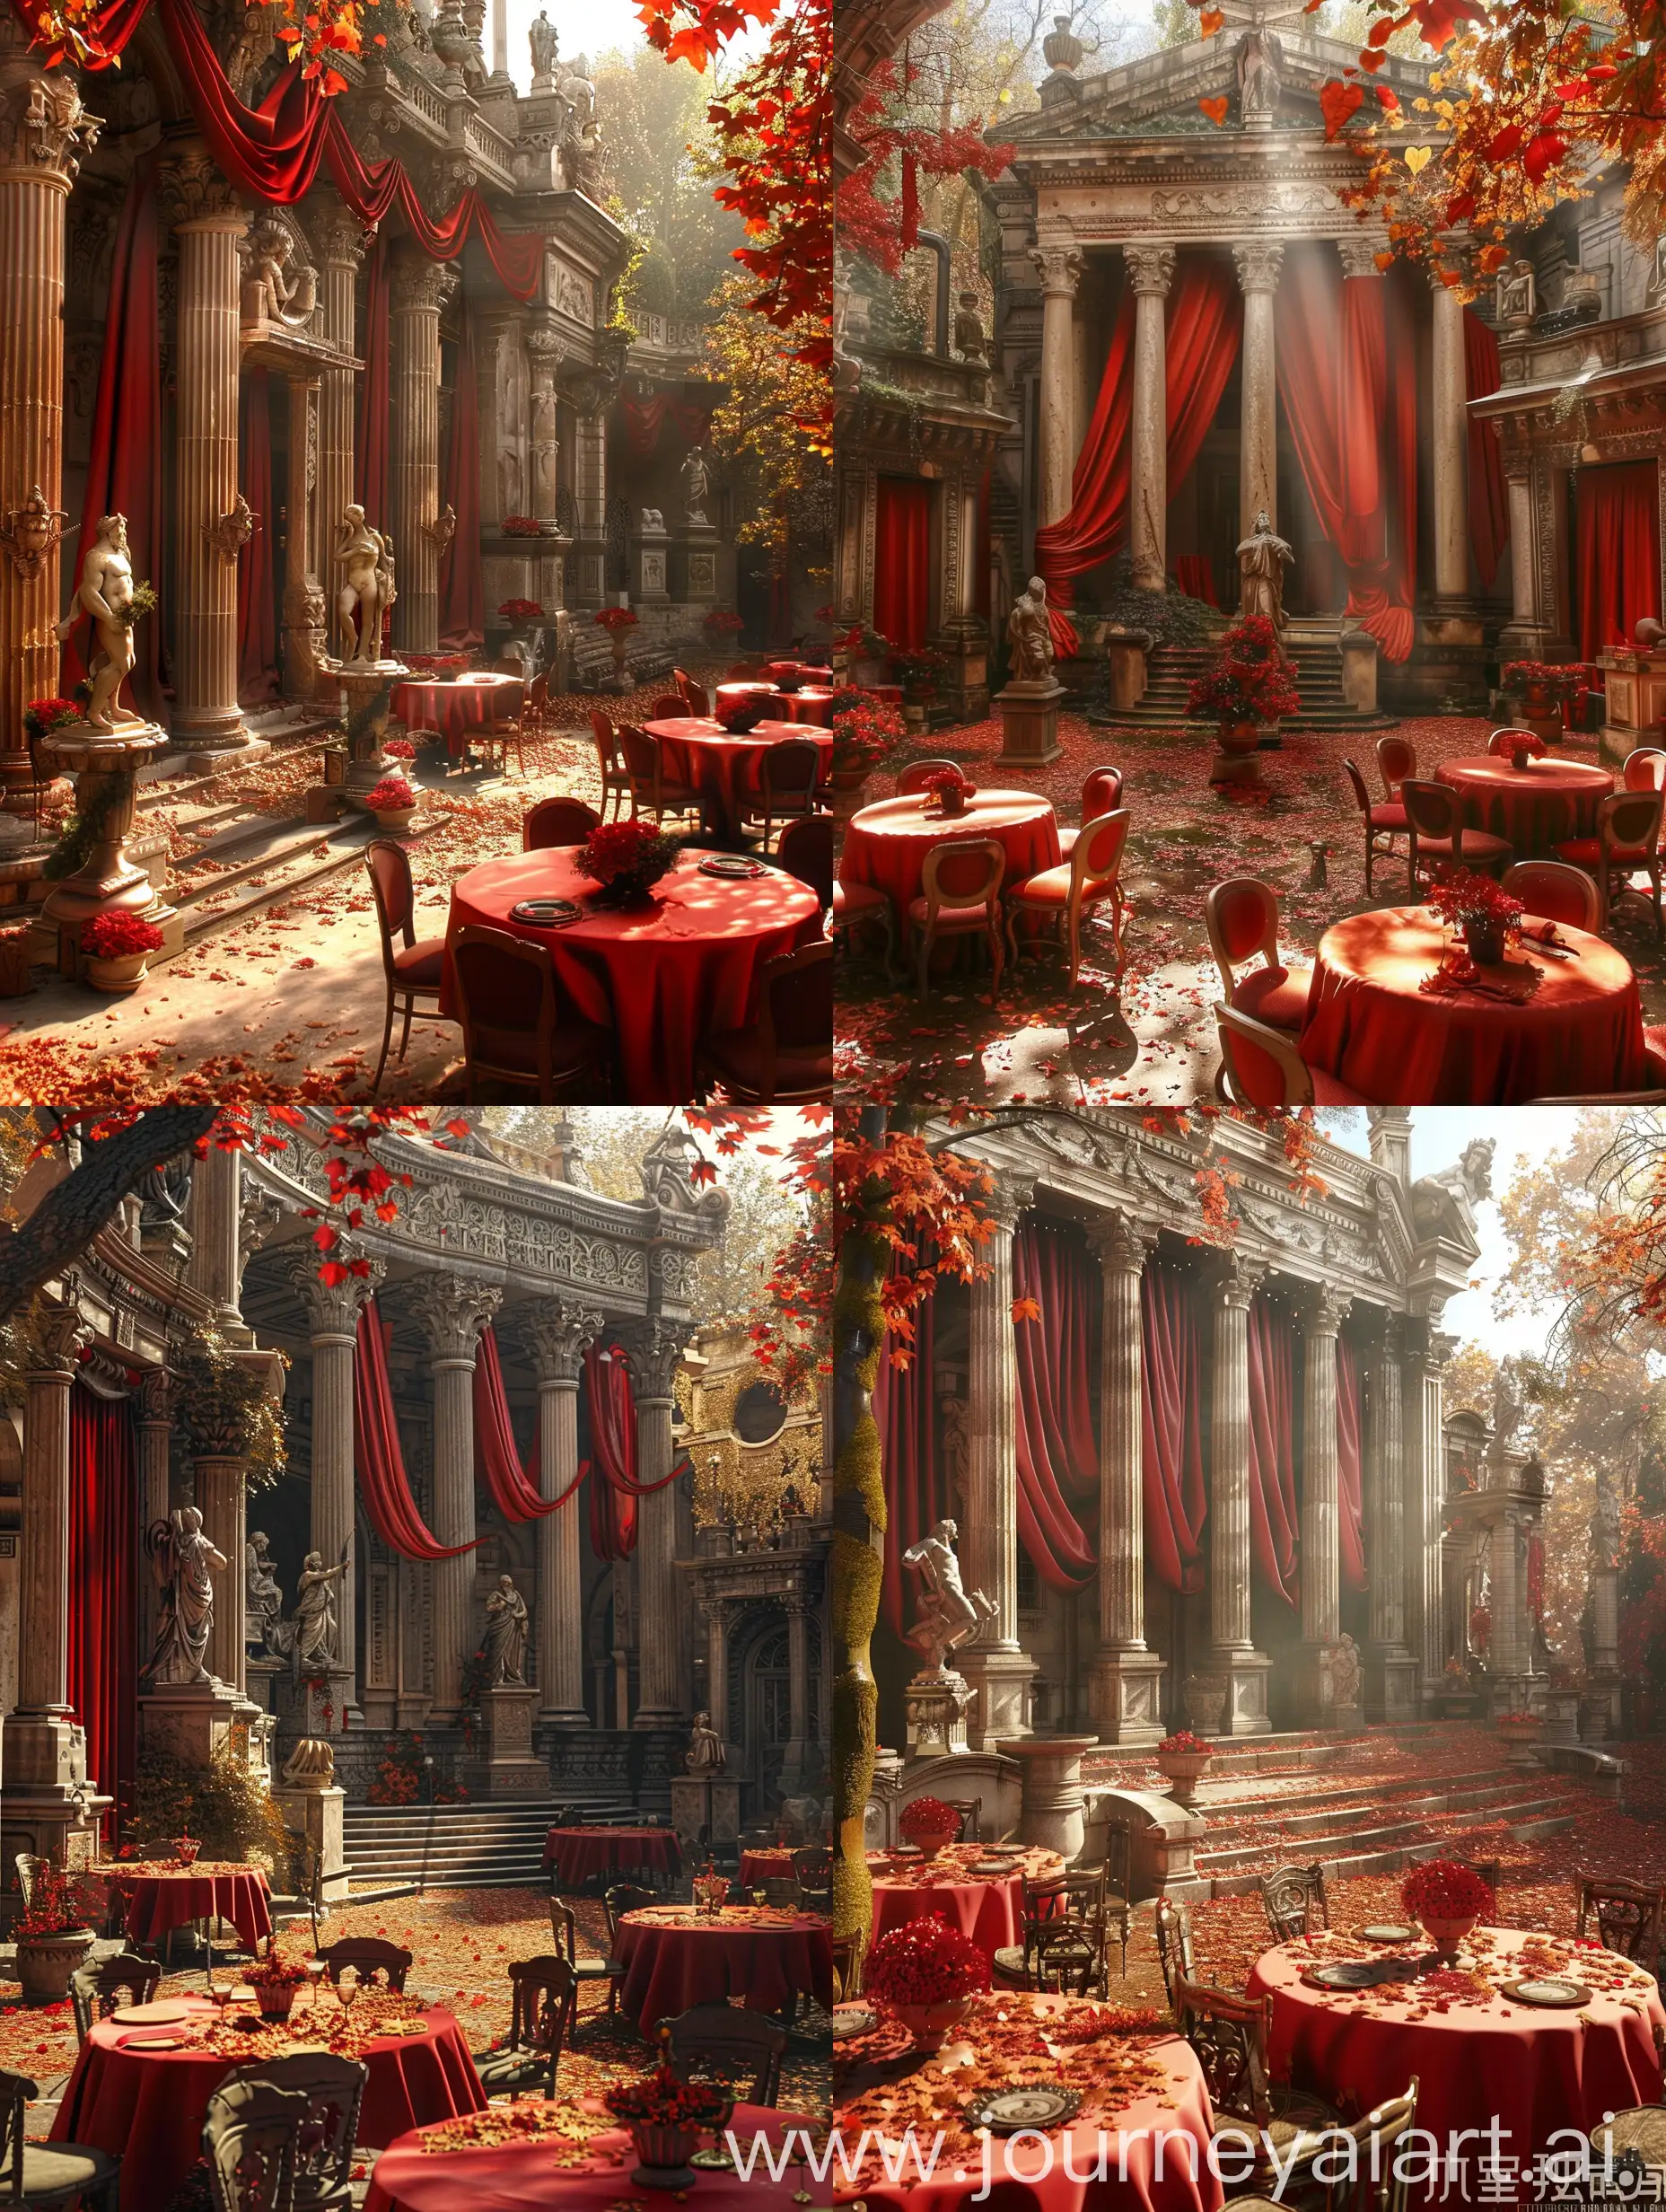 A breathtaking scene of a classical architectural setting, featuring a grand central building adorned with tall columns, intricate carvings, and statues, all accentuated by red drapery. The autumn ambiance is evident with fallen leaves scattered on the ground. Round tables with red tablecloths and chairs fill the foreground, hinting at a future meal or gathering. Ornate flower pots with vibrant red blooms add a touch of color to the stone environment. Sunlight filters through the trees, casting dynamic shadows and highlighting the architectural beauty. The atmosphere is serene and majestic, capturing an aura of timeless elegance.